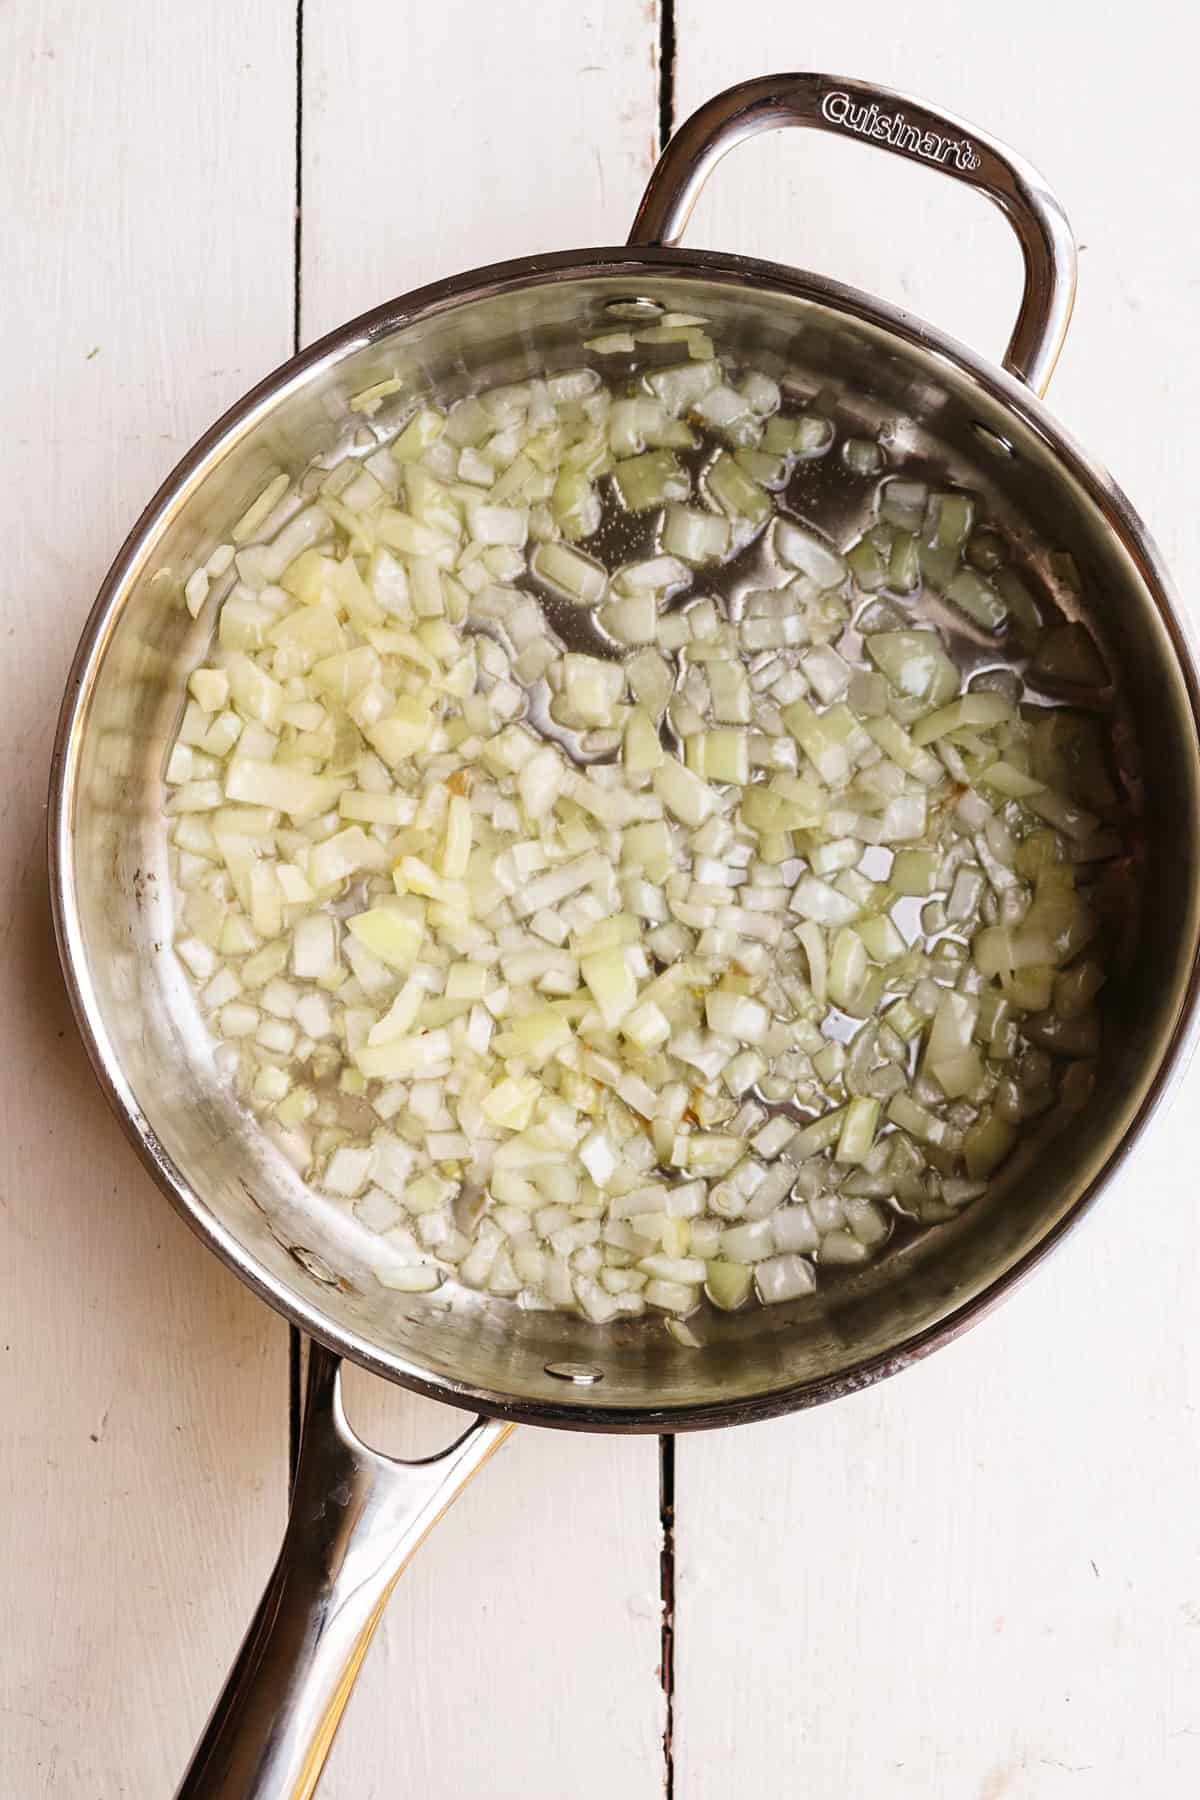 onions sauteing in olive oil.